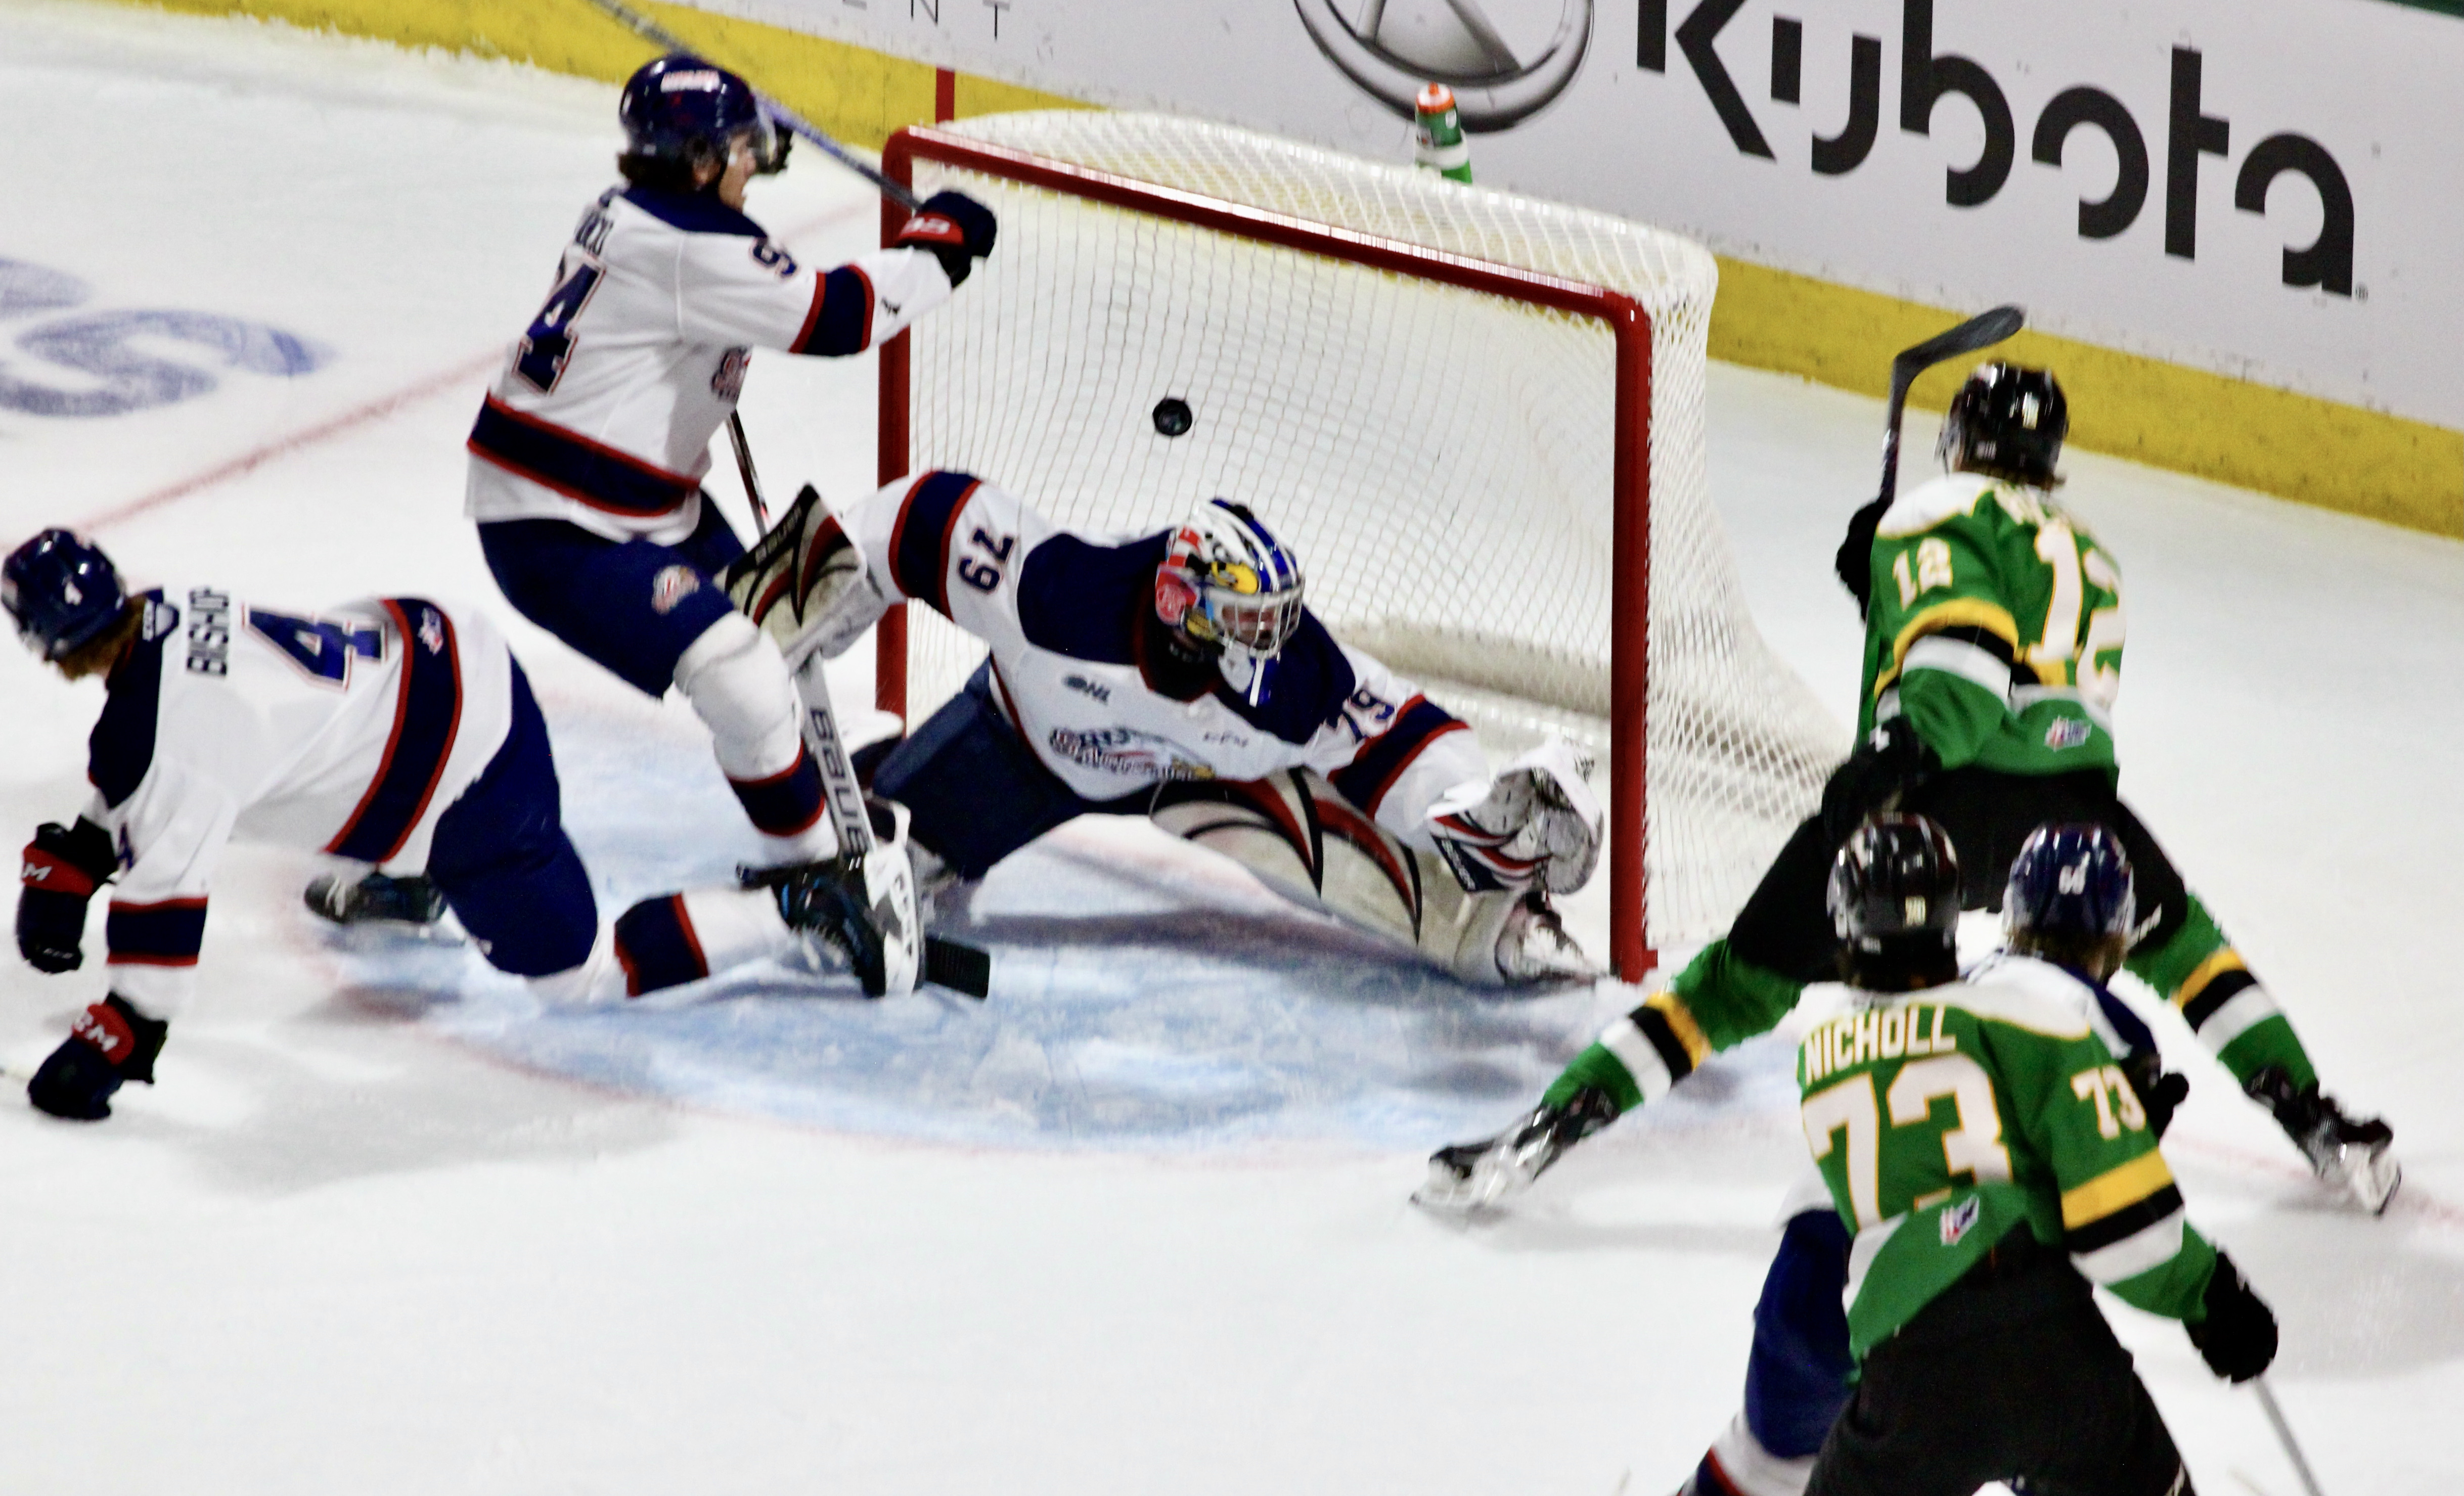 Big third period by London Knights leads to Game 1 win of Western
Conference Championship